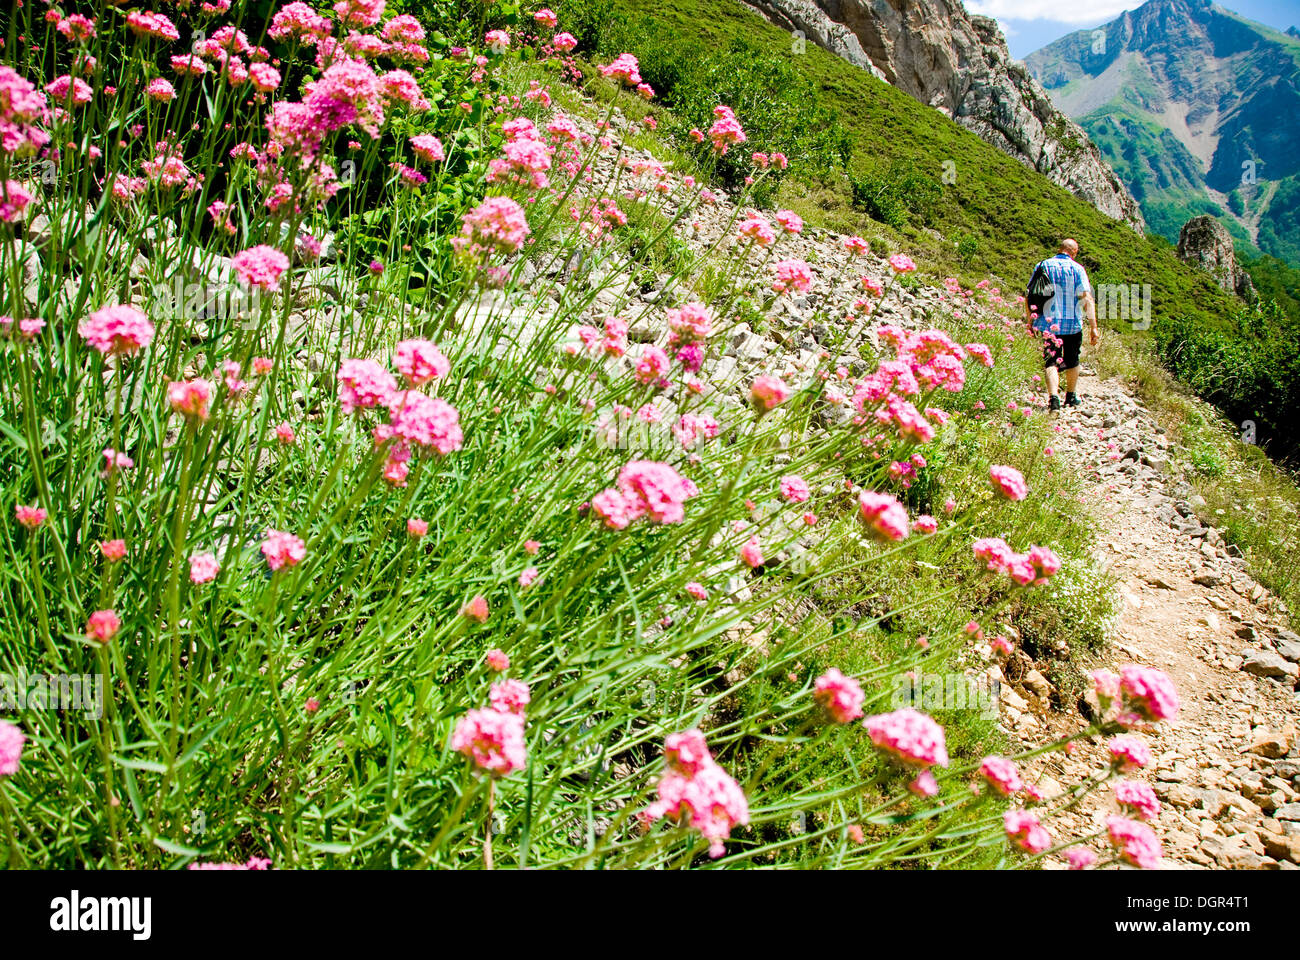 man walking in the Mountains with flowers Stock Photo